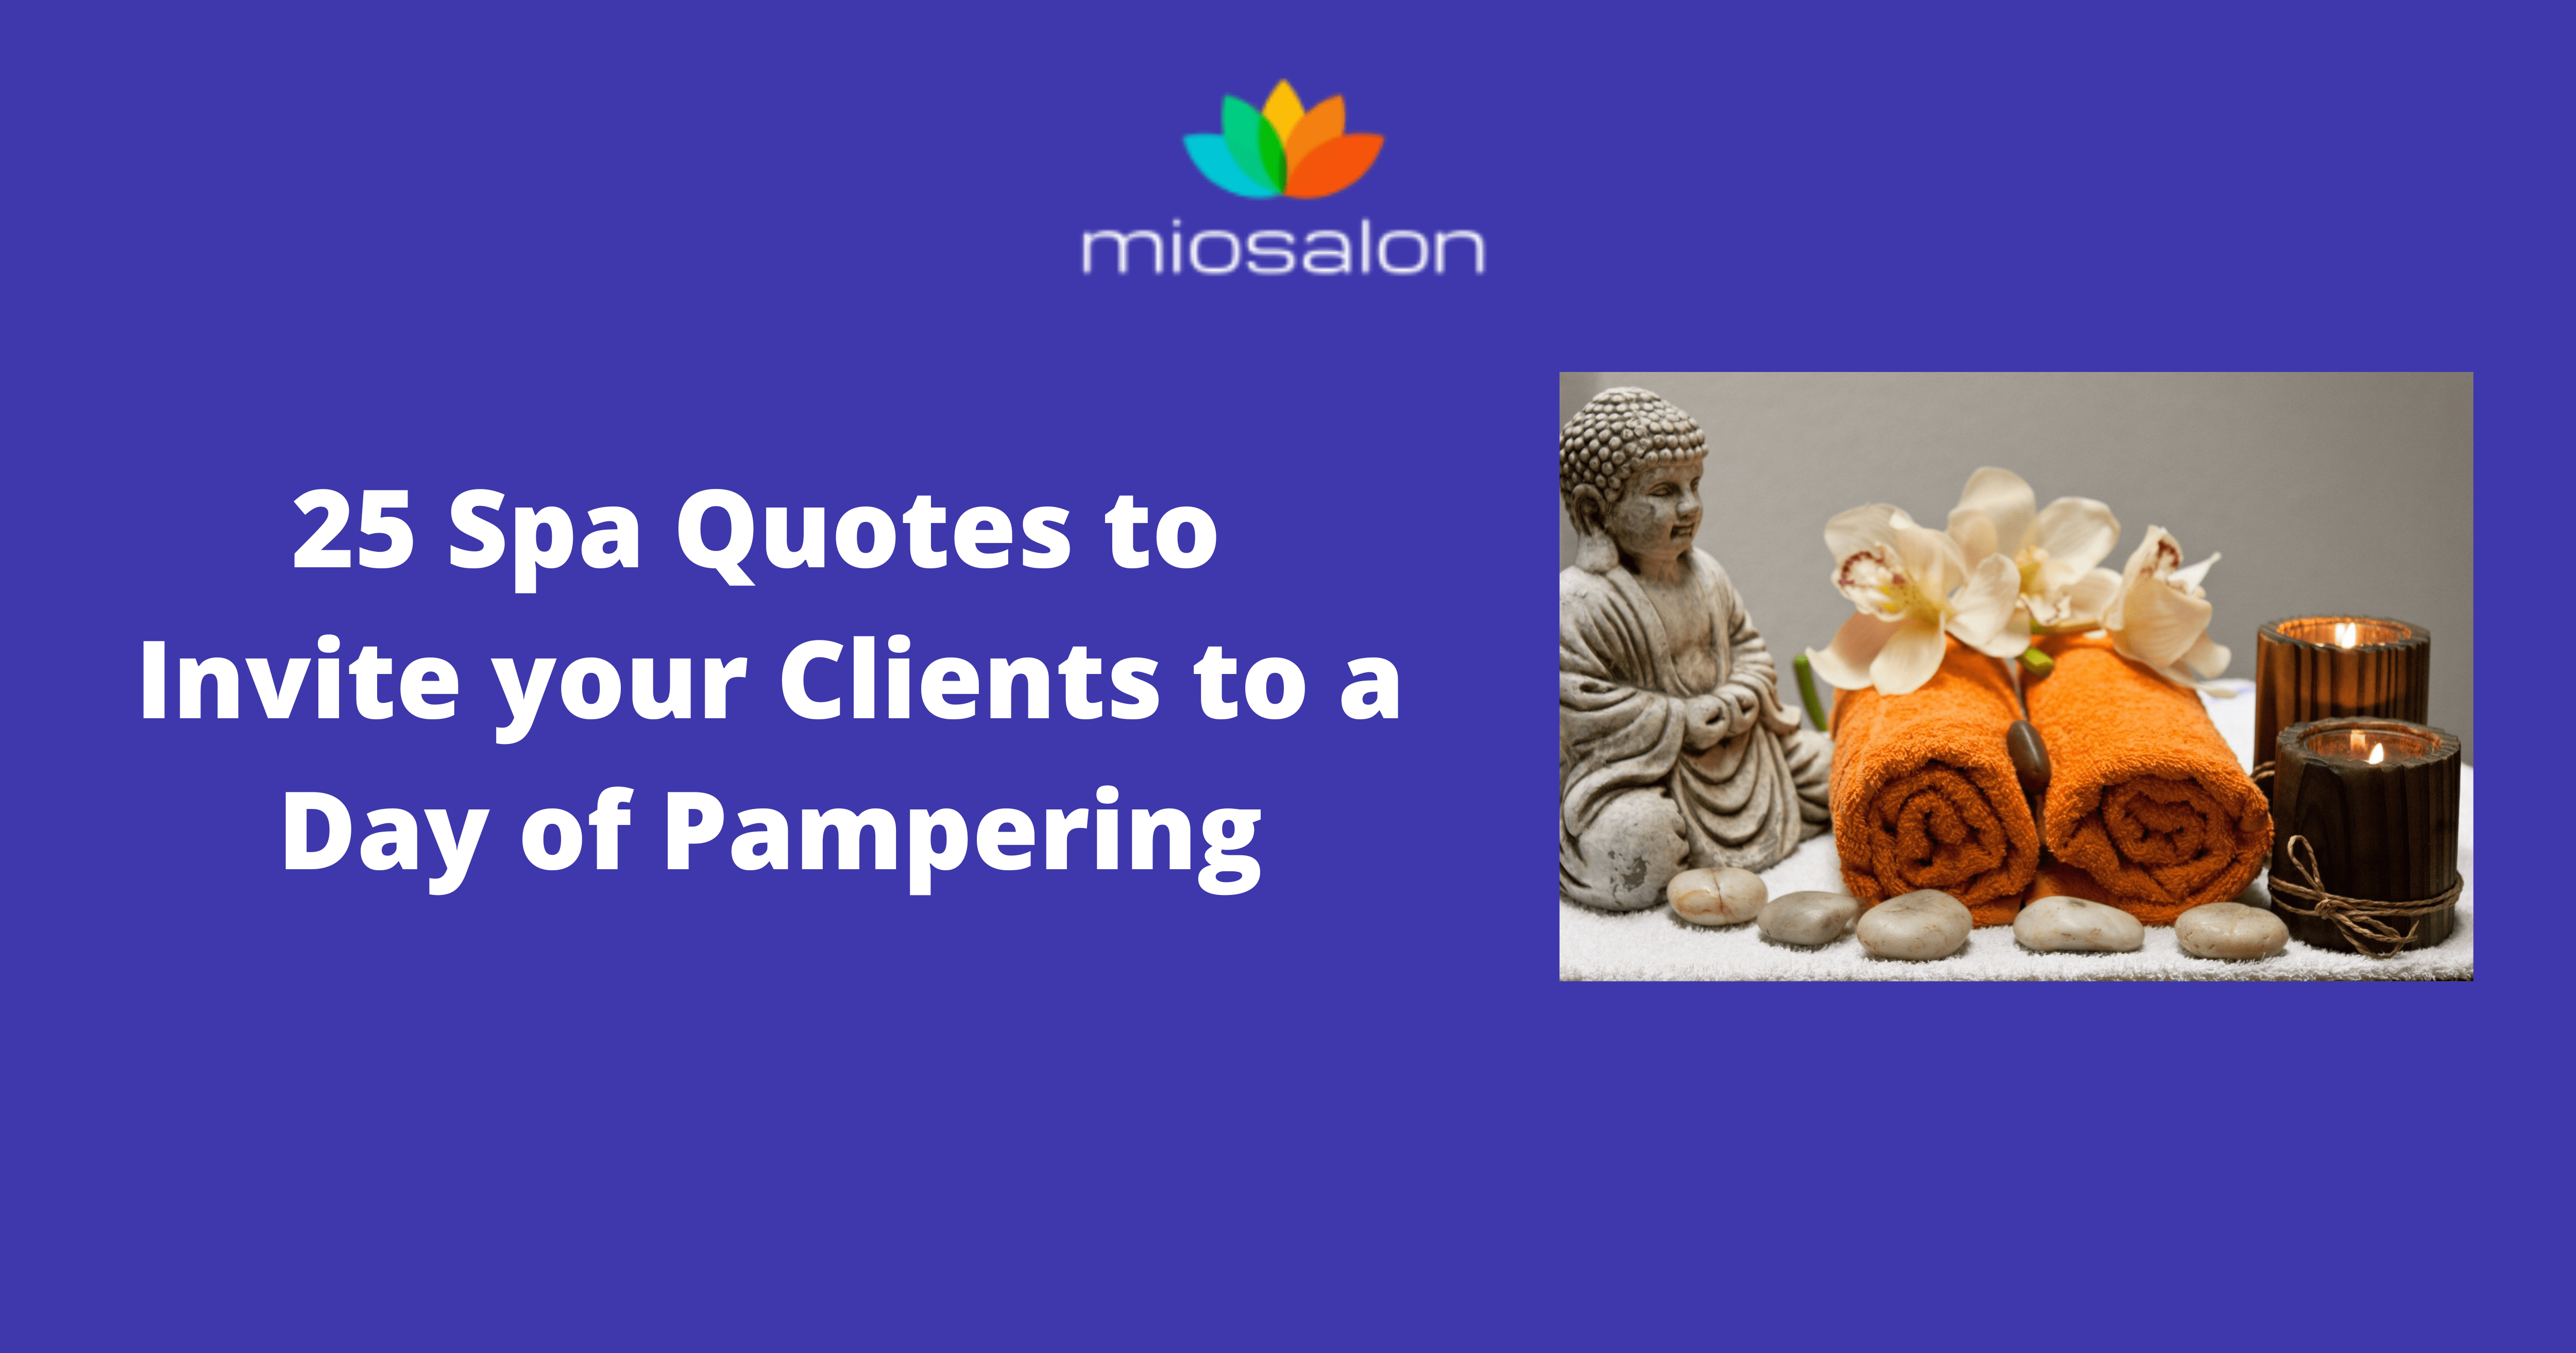 25 Spa Quotes to Invite your Clients to a Day of Pampering